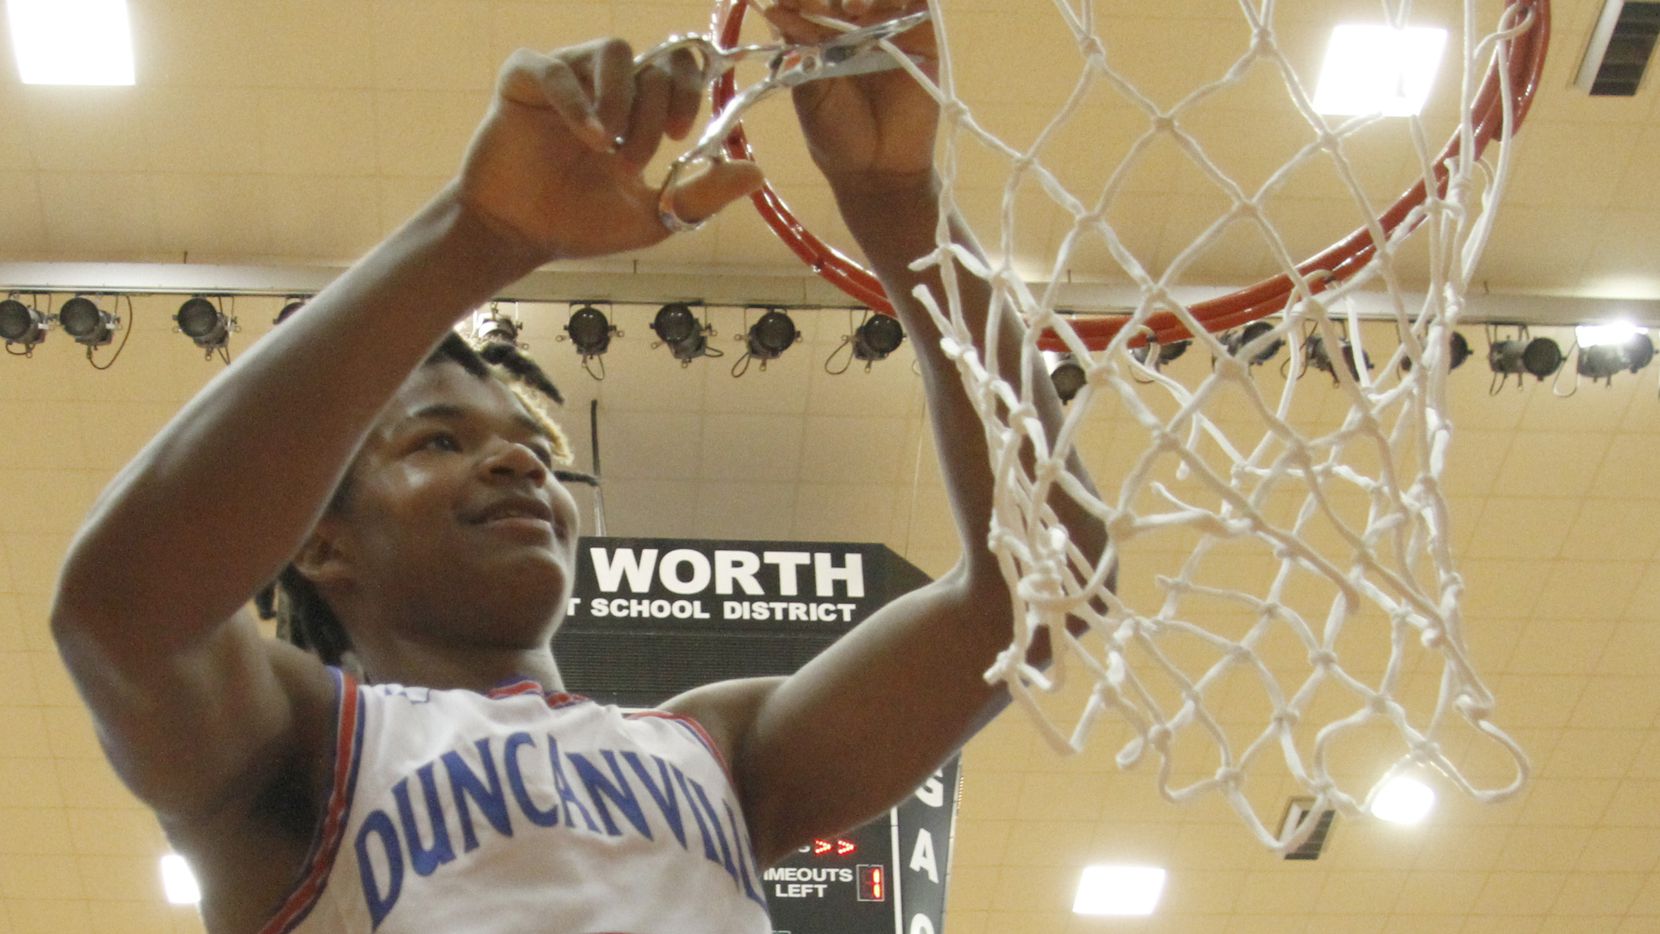 Duncanville guard C.J. Ford (3) was all smiles as he cuts a portion of the net from the rim...